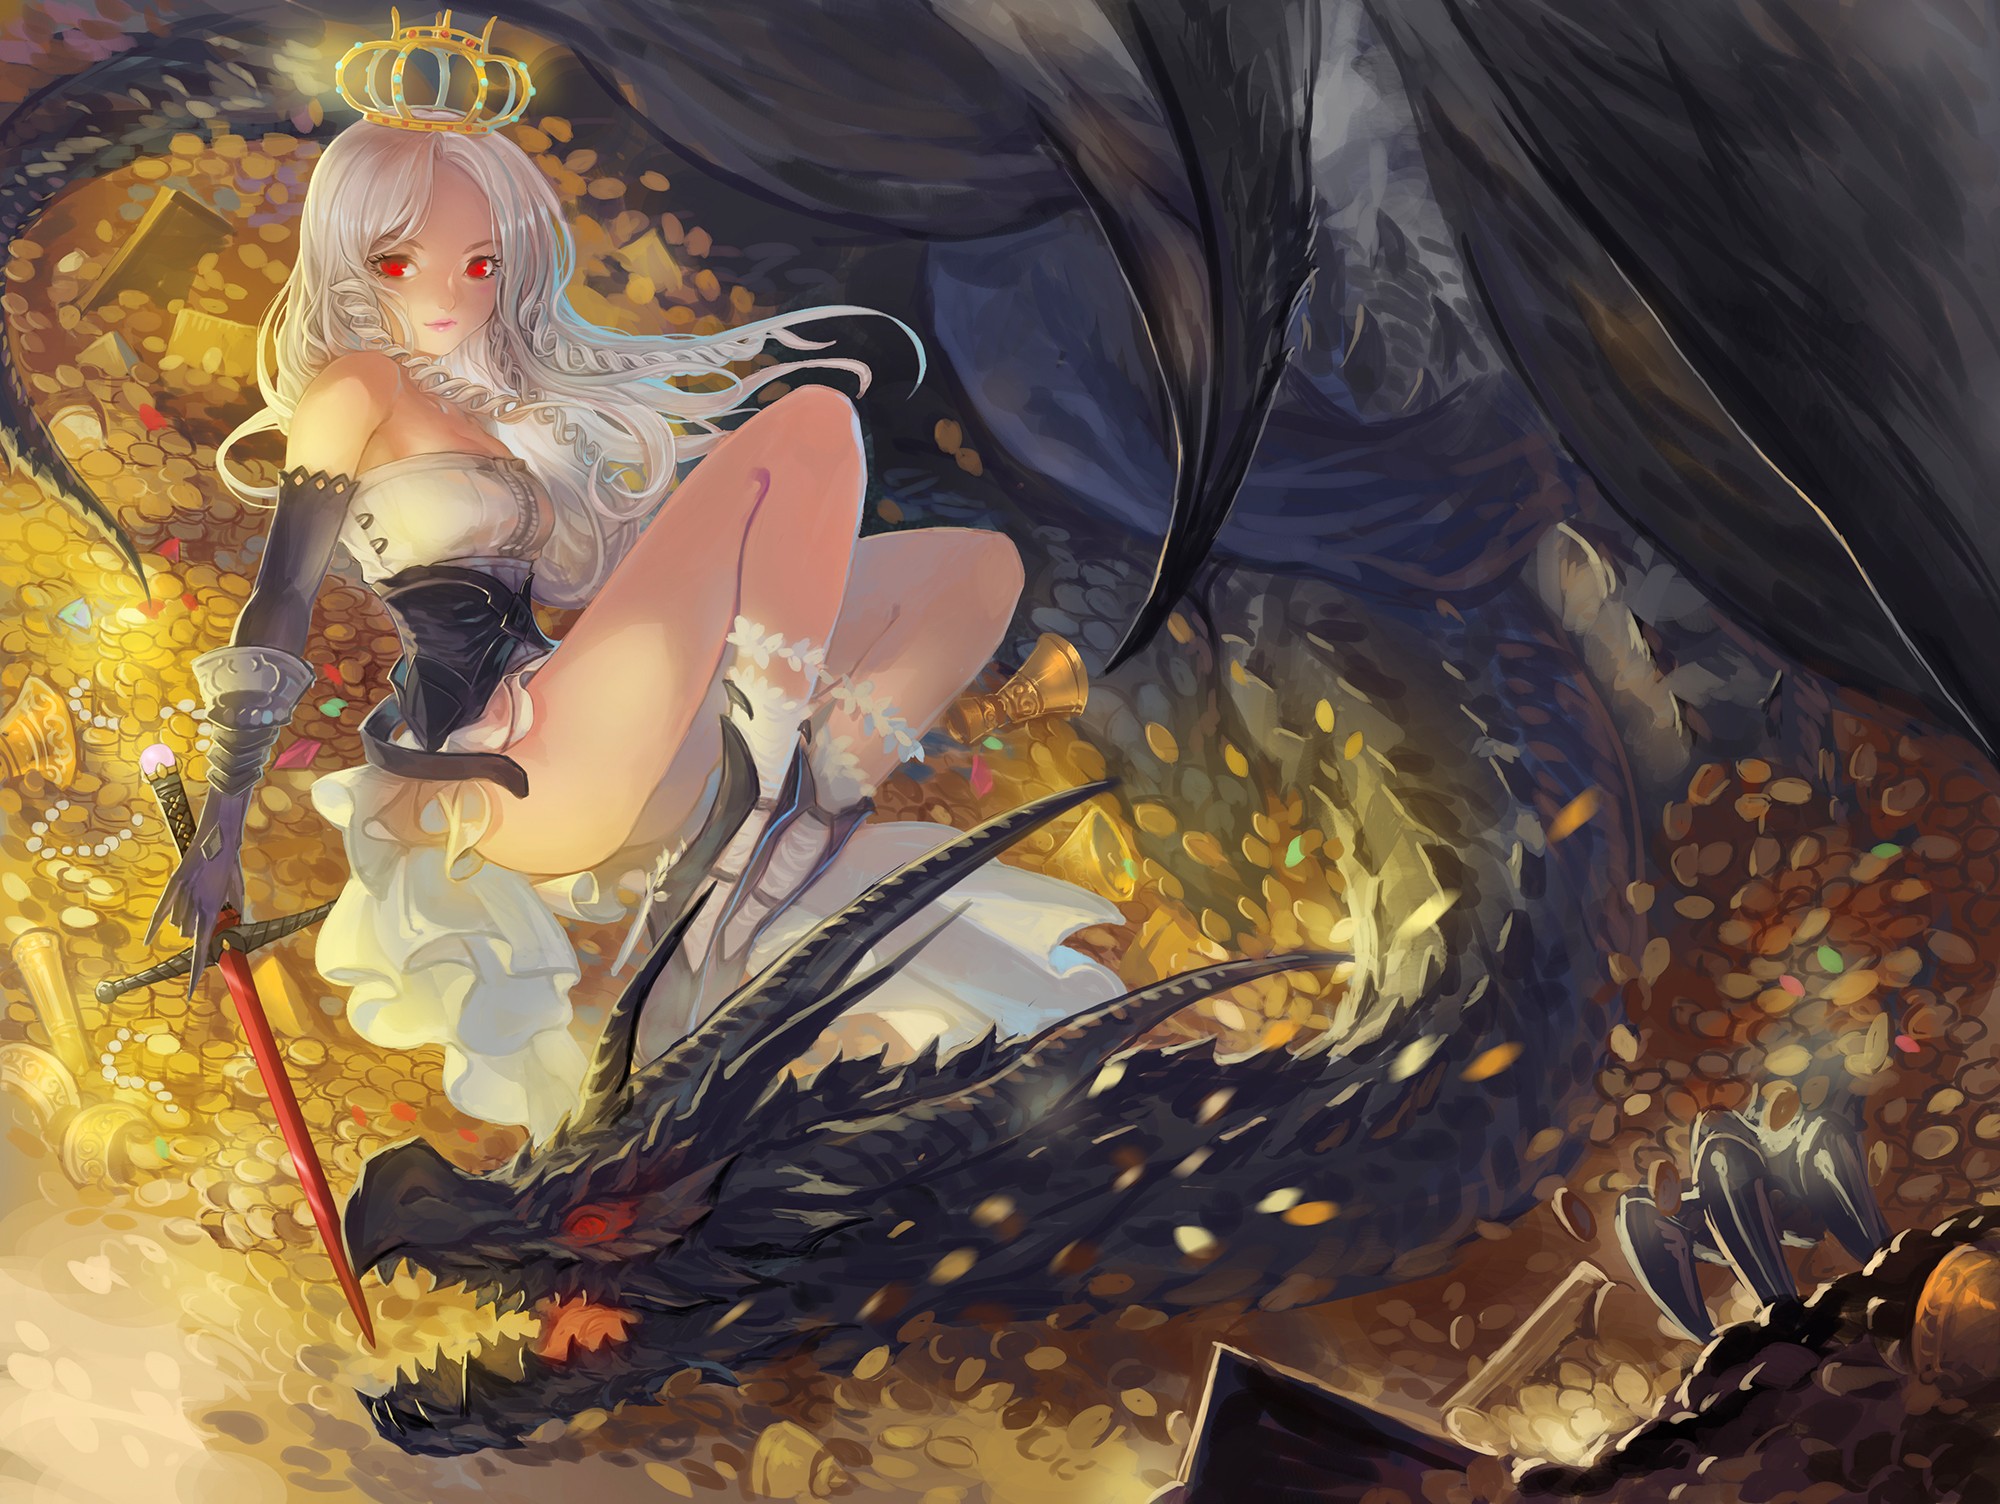 Anime 2000x1504 anime anime girls dragon original characters crown red eyes fantasy art fantasy girl legs thighs creature gold treasure women women with swords